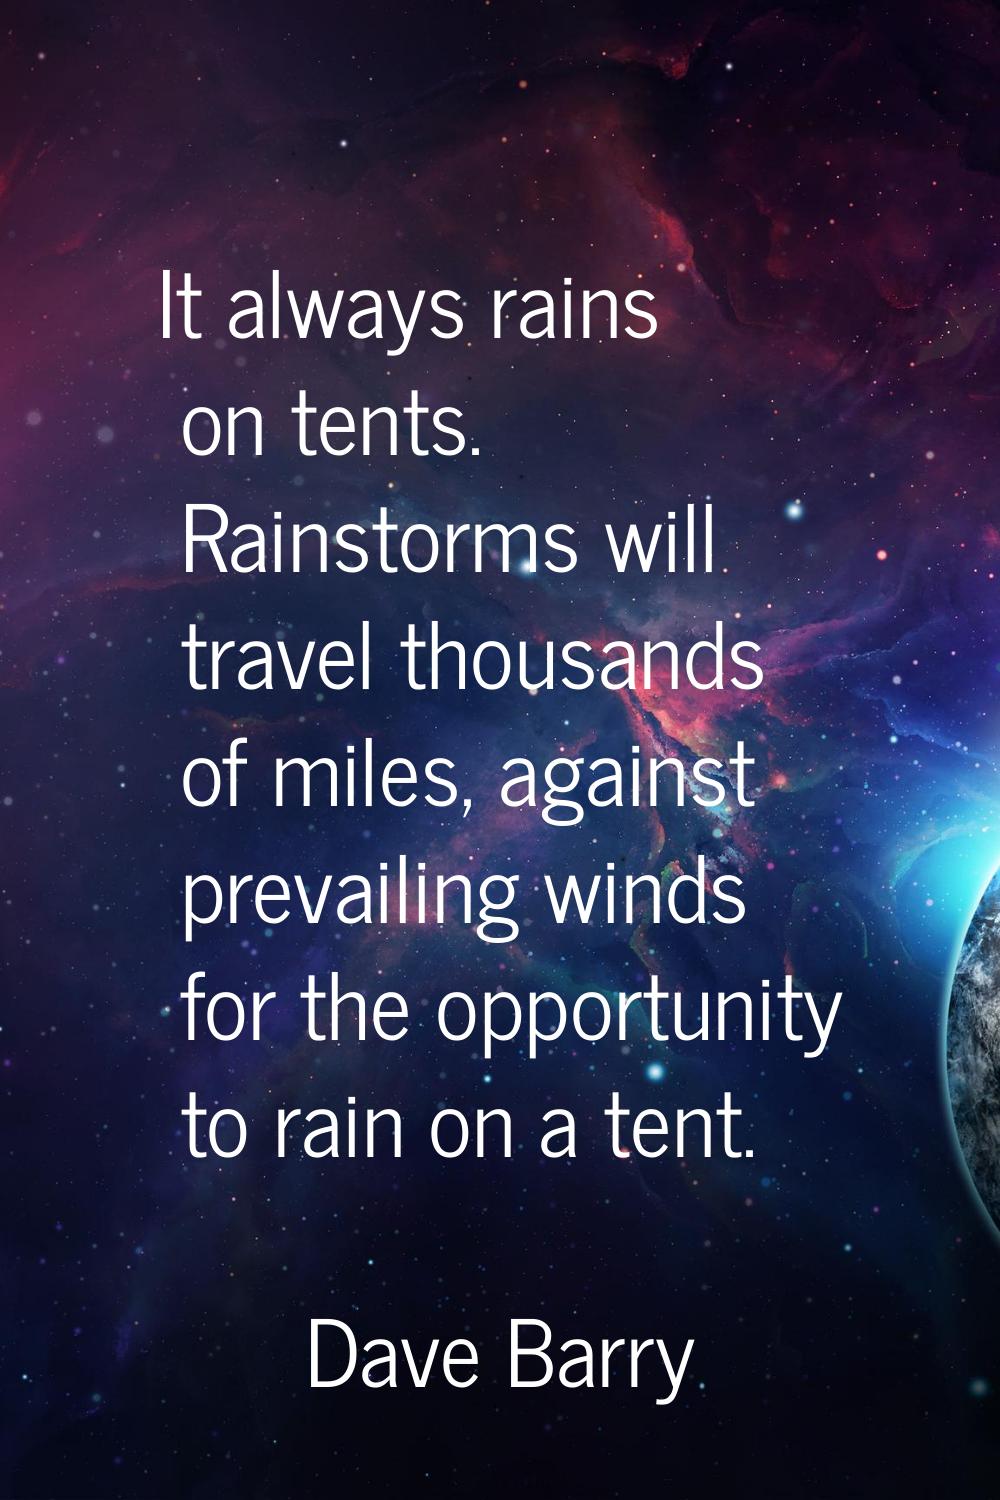 It always rains on tents. Rainstorms will travel thousands of miles, against prevailing winds for t